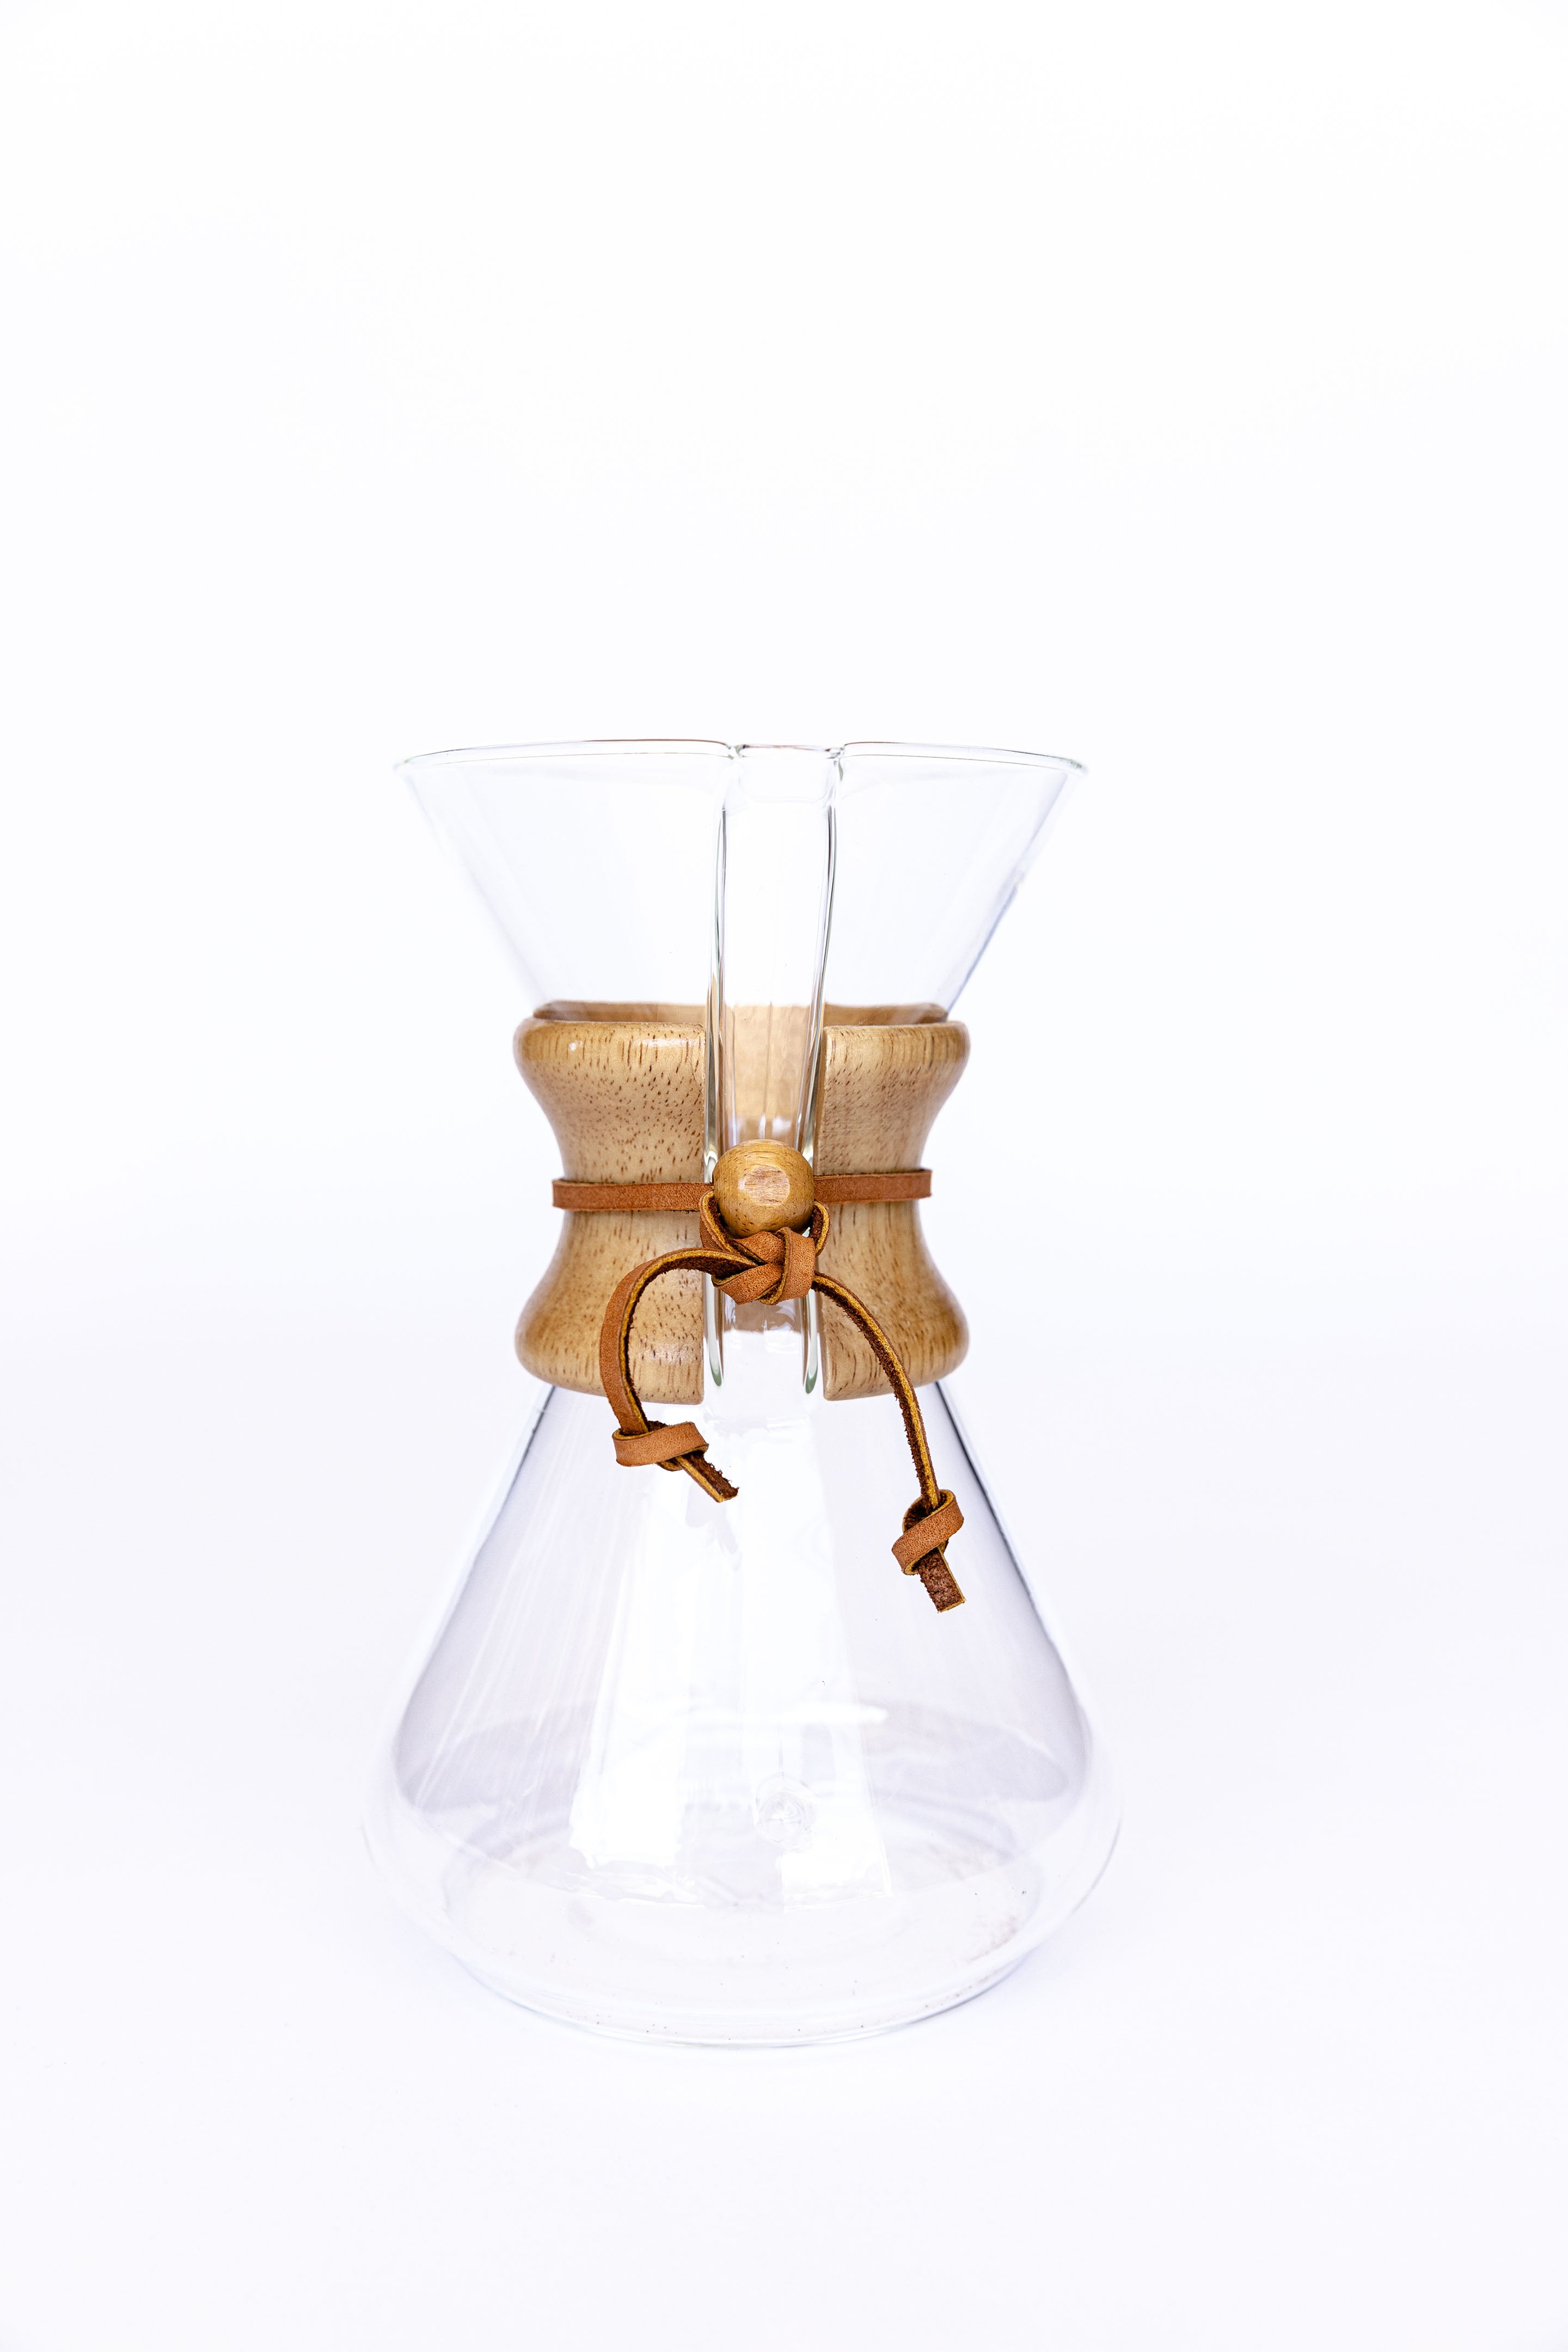 Chemex 6-Cup Glass Pour-Over Coffee Maker with Dark Wood Collar + Reviews